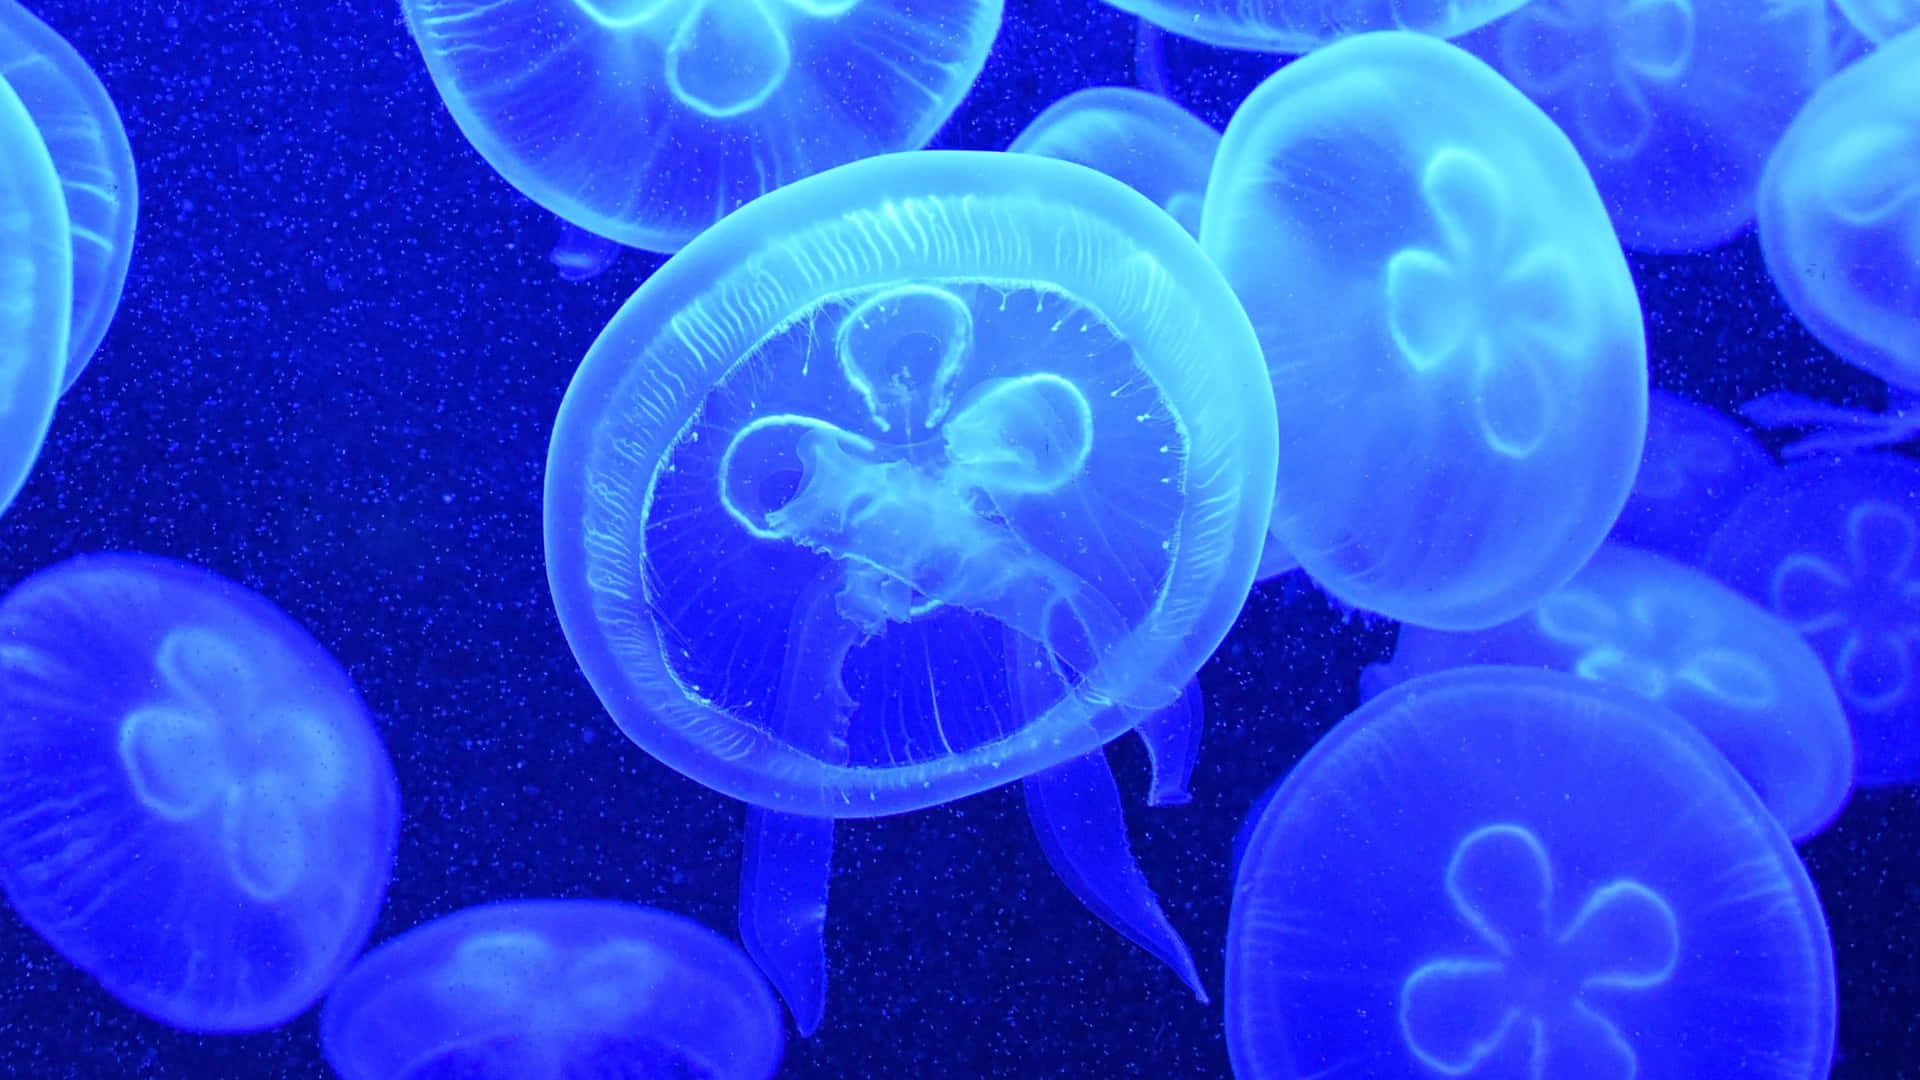 Enjoy The Ethereal Beauty Of The 4k Jellyfish